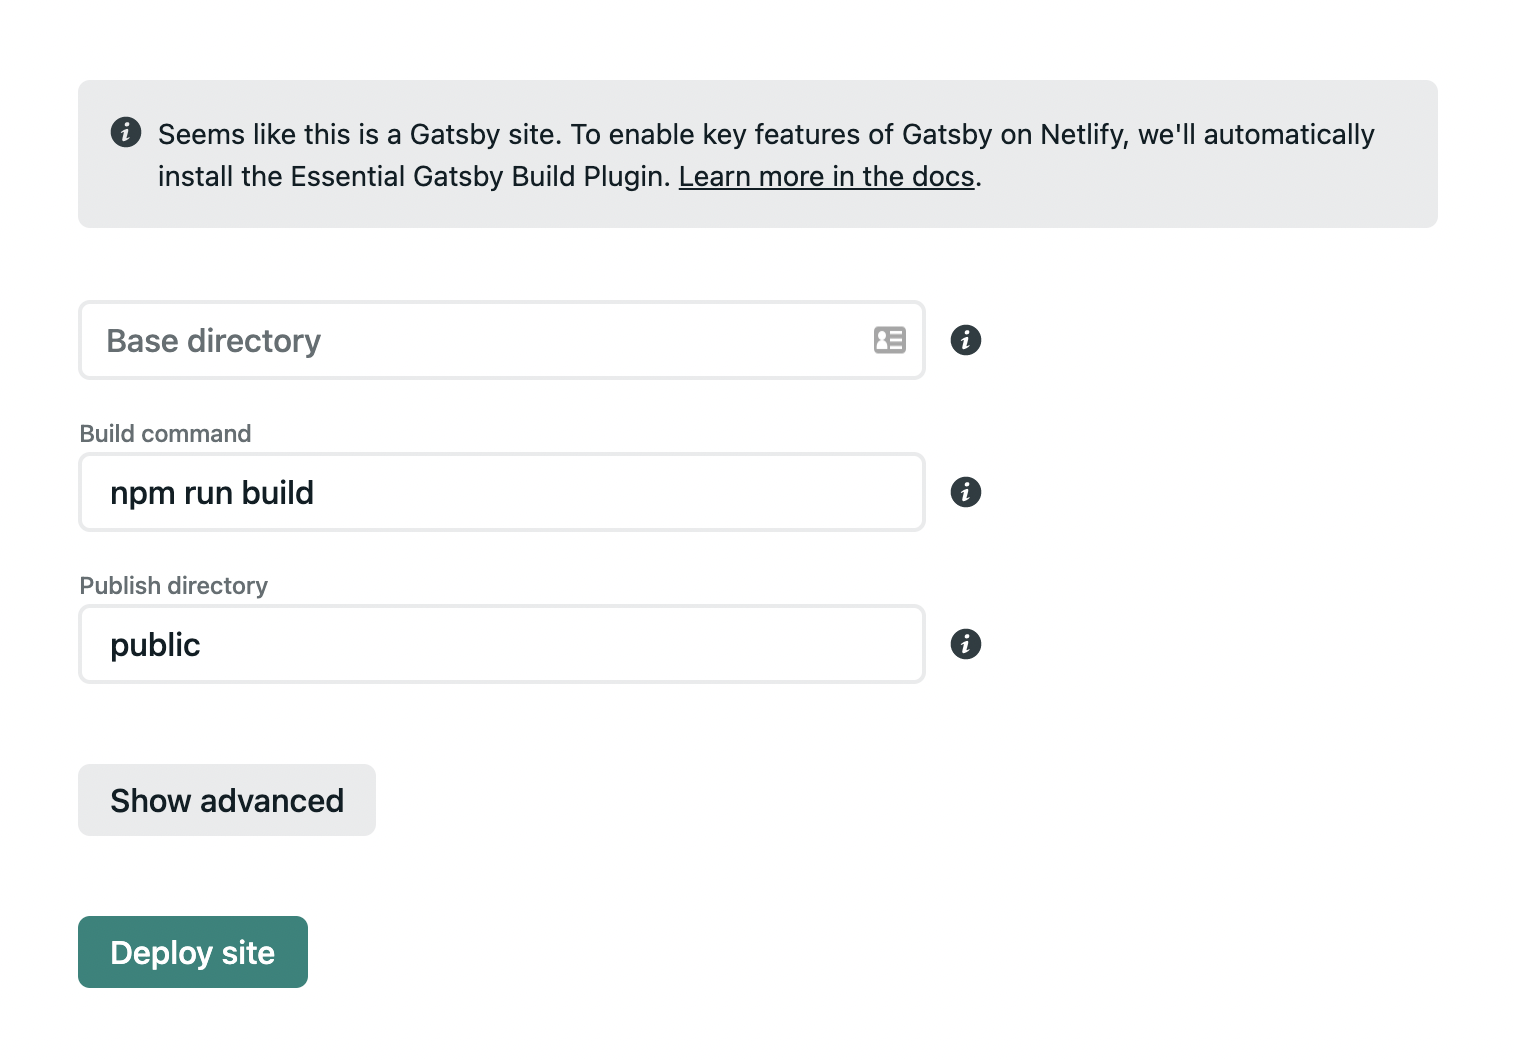 Screenshot of Netlify app reads: Seems like this is a Gatsby site. To enable key features of Gatsby on Netlify, we'll automatically install the Essential Gatsby Build Plugin. 